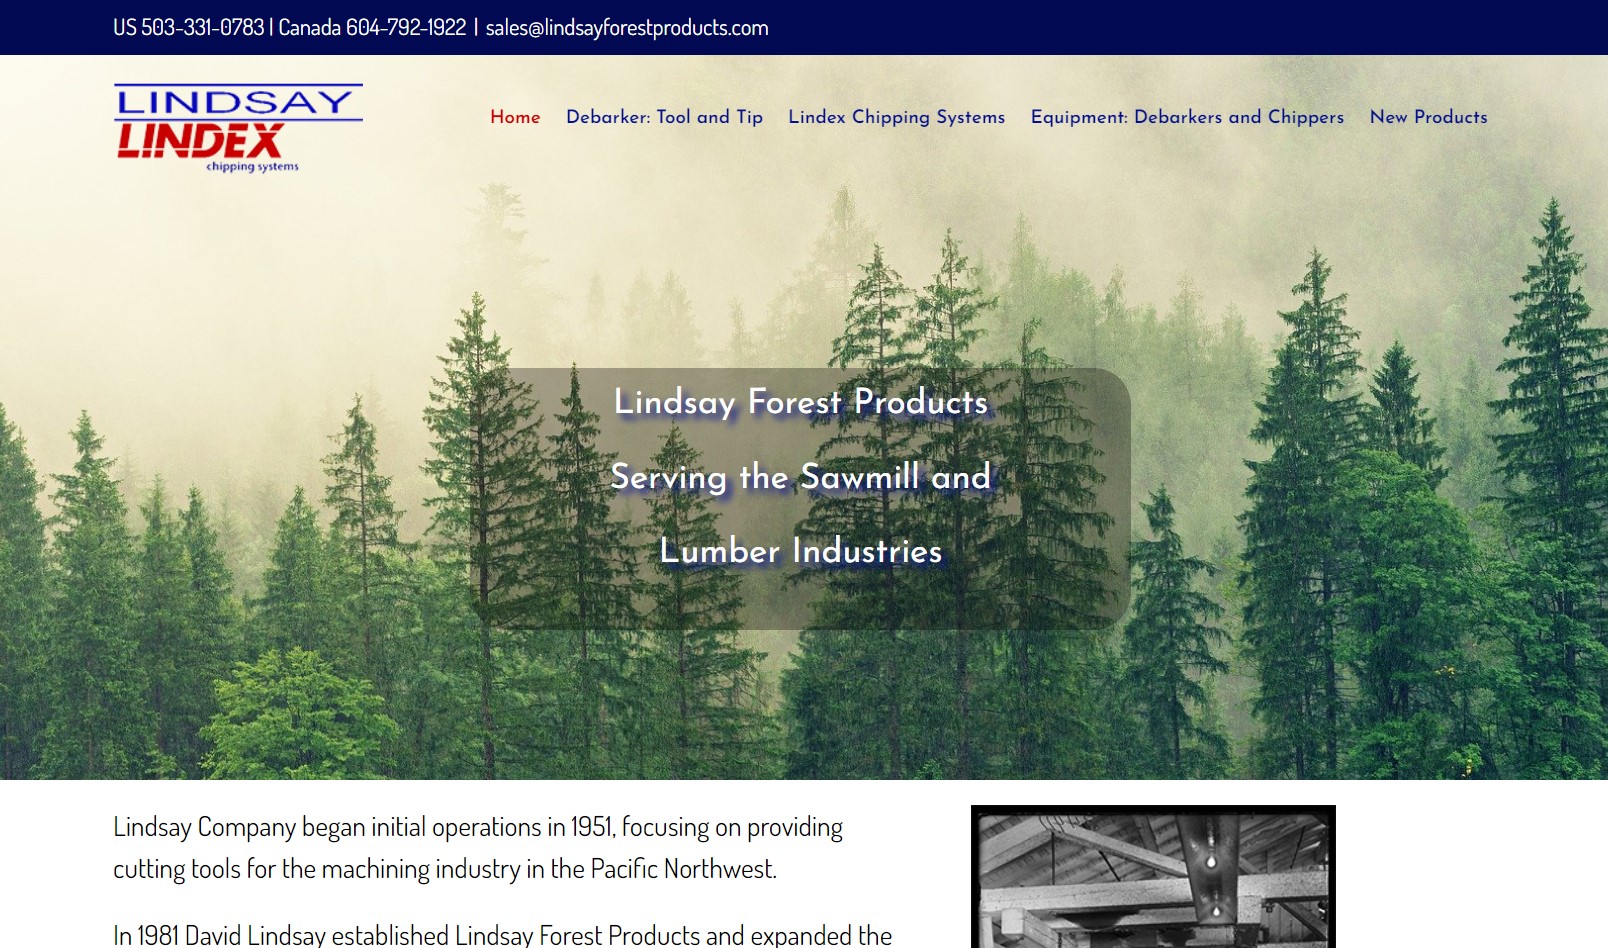 Lindsay Forest Products